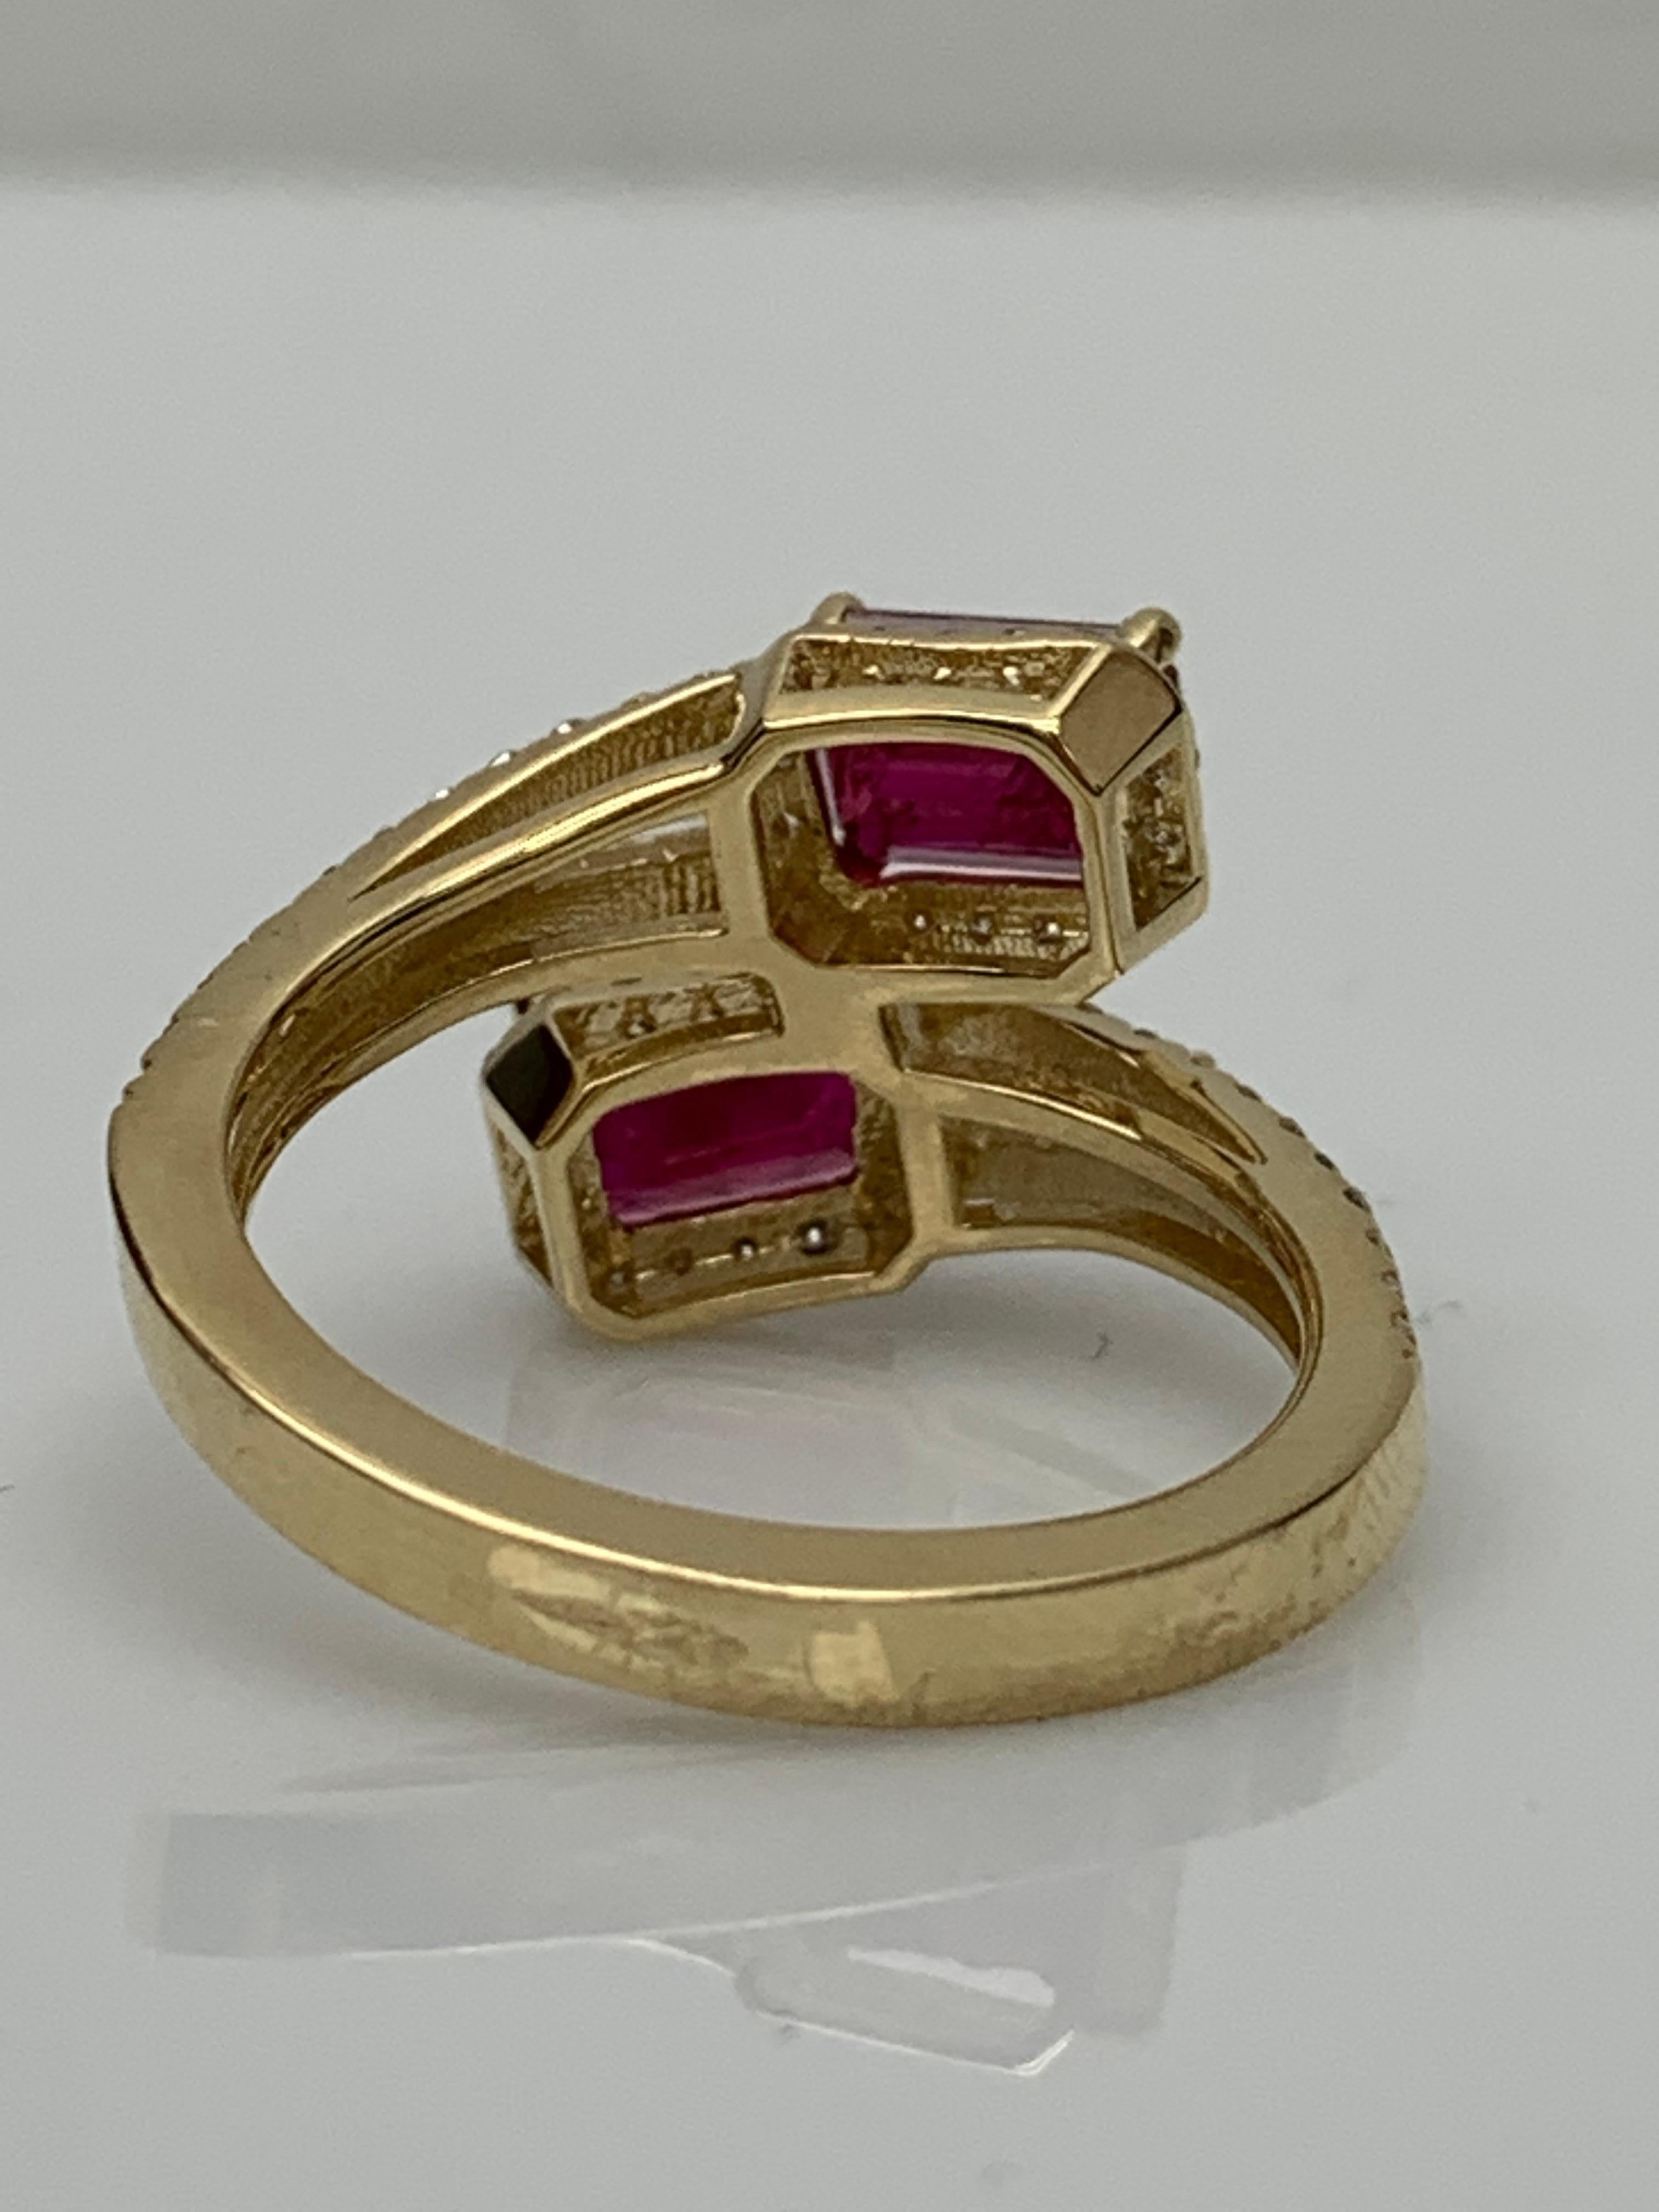 Modern 2.18 Carat Emerald Cut Ruby Diamond Toi et Moi Engagement Ring 14K Yellow Gold For Sale